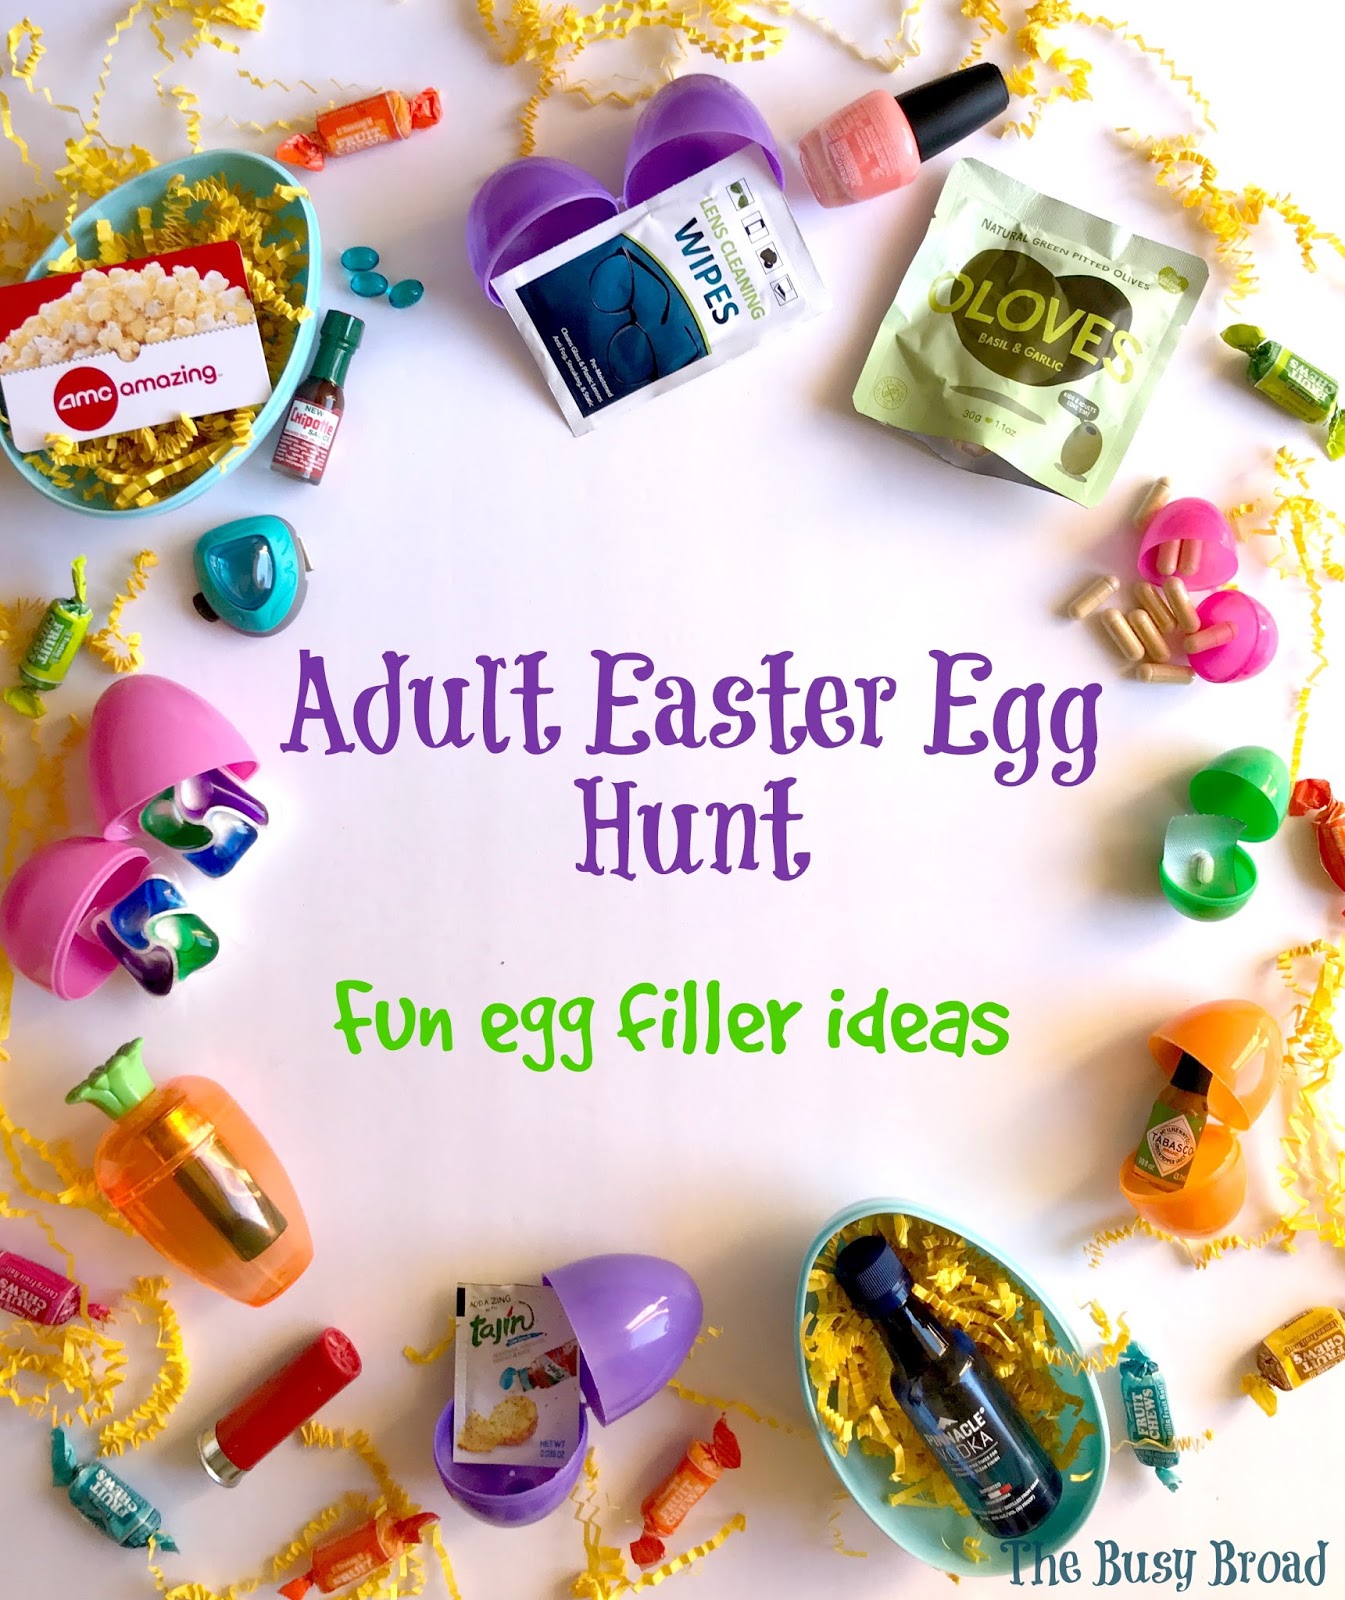 The Busy Broad: Adult Easter Egg Hunt: Fun Egg Filler Ideas